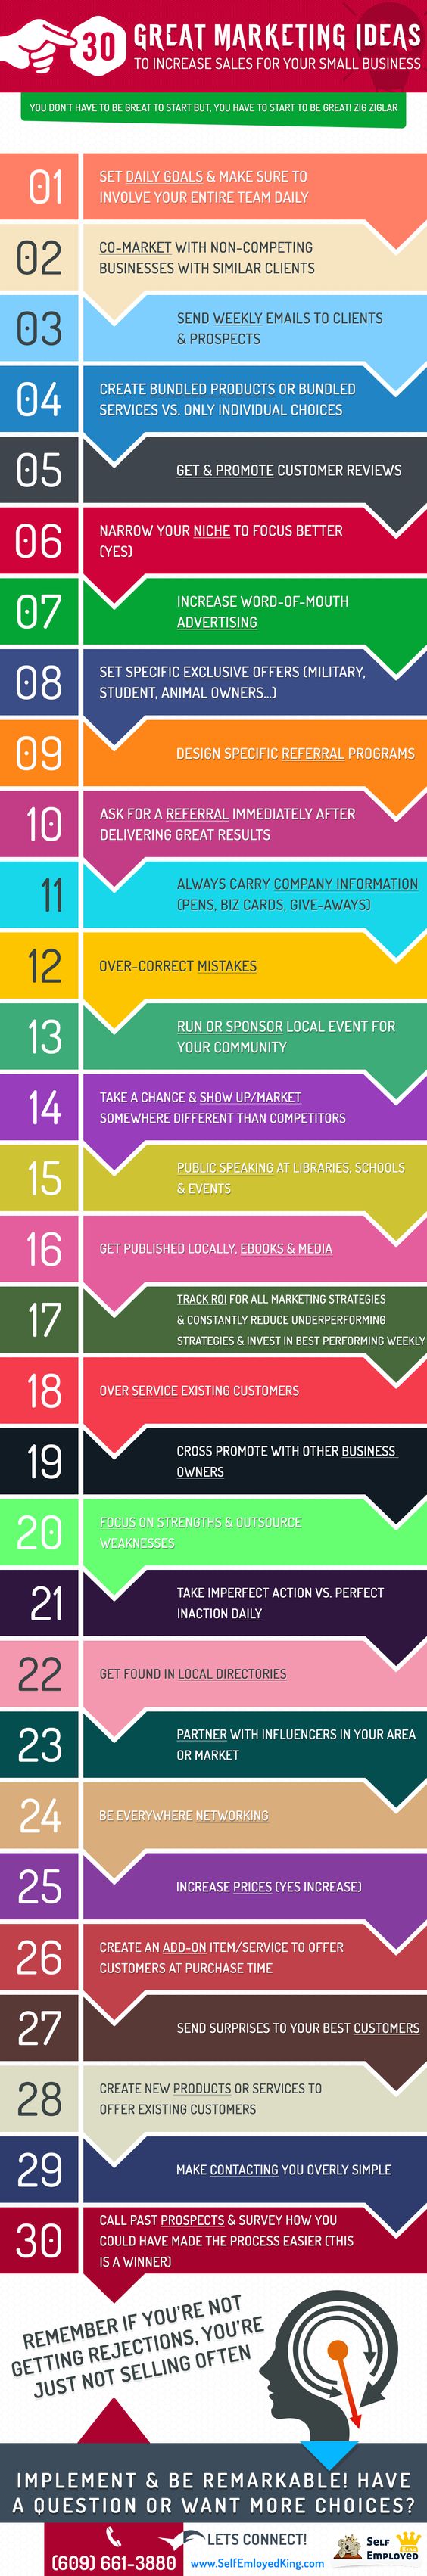 30 small business marketing ideas [INFOGRAPHIC]